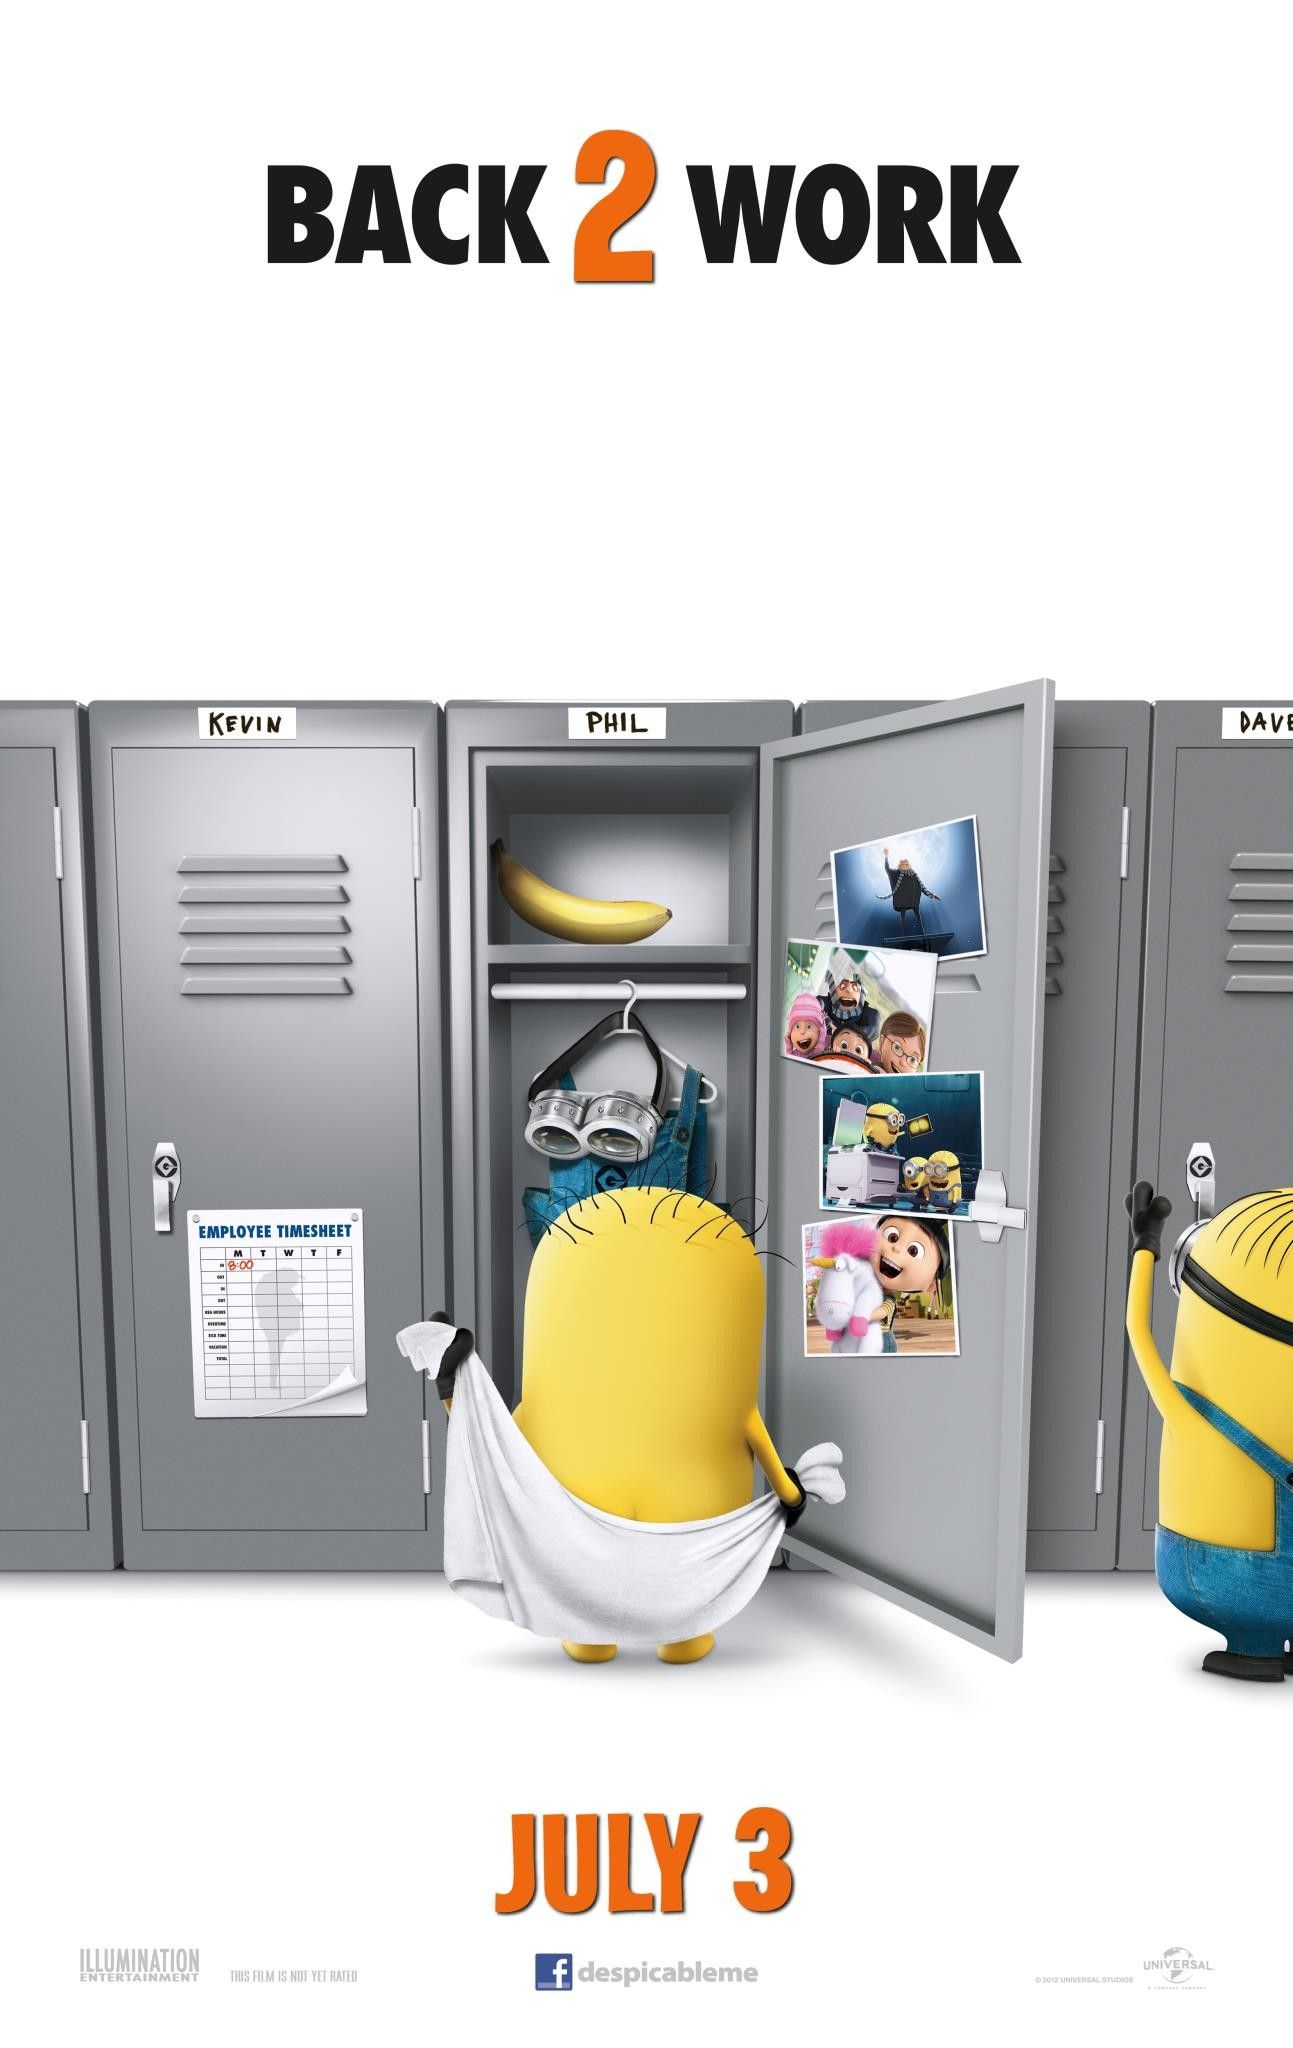 Despicable Me 2 Back 2 Work Poster